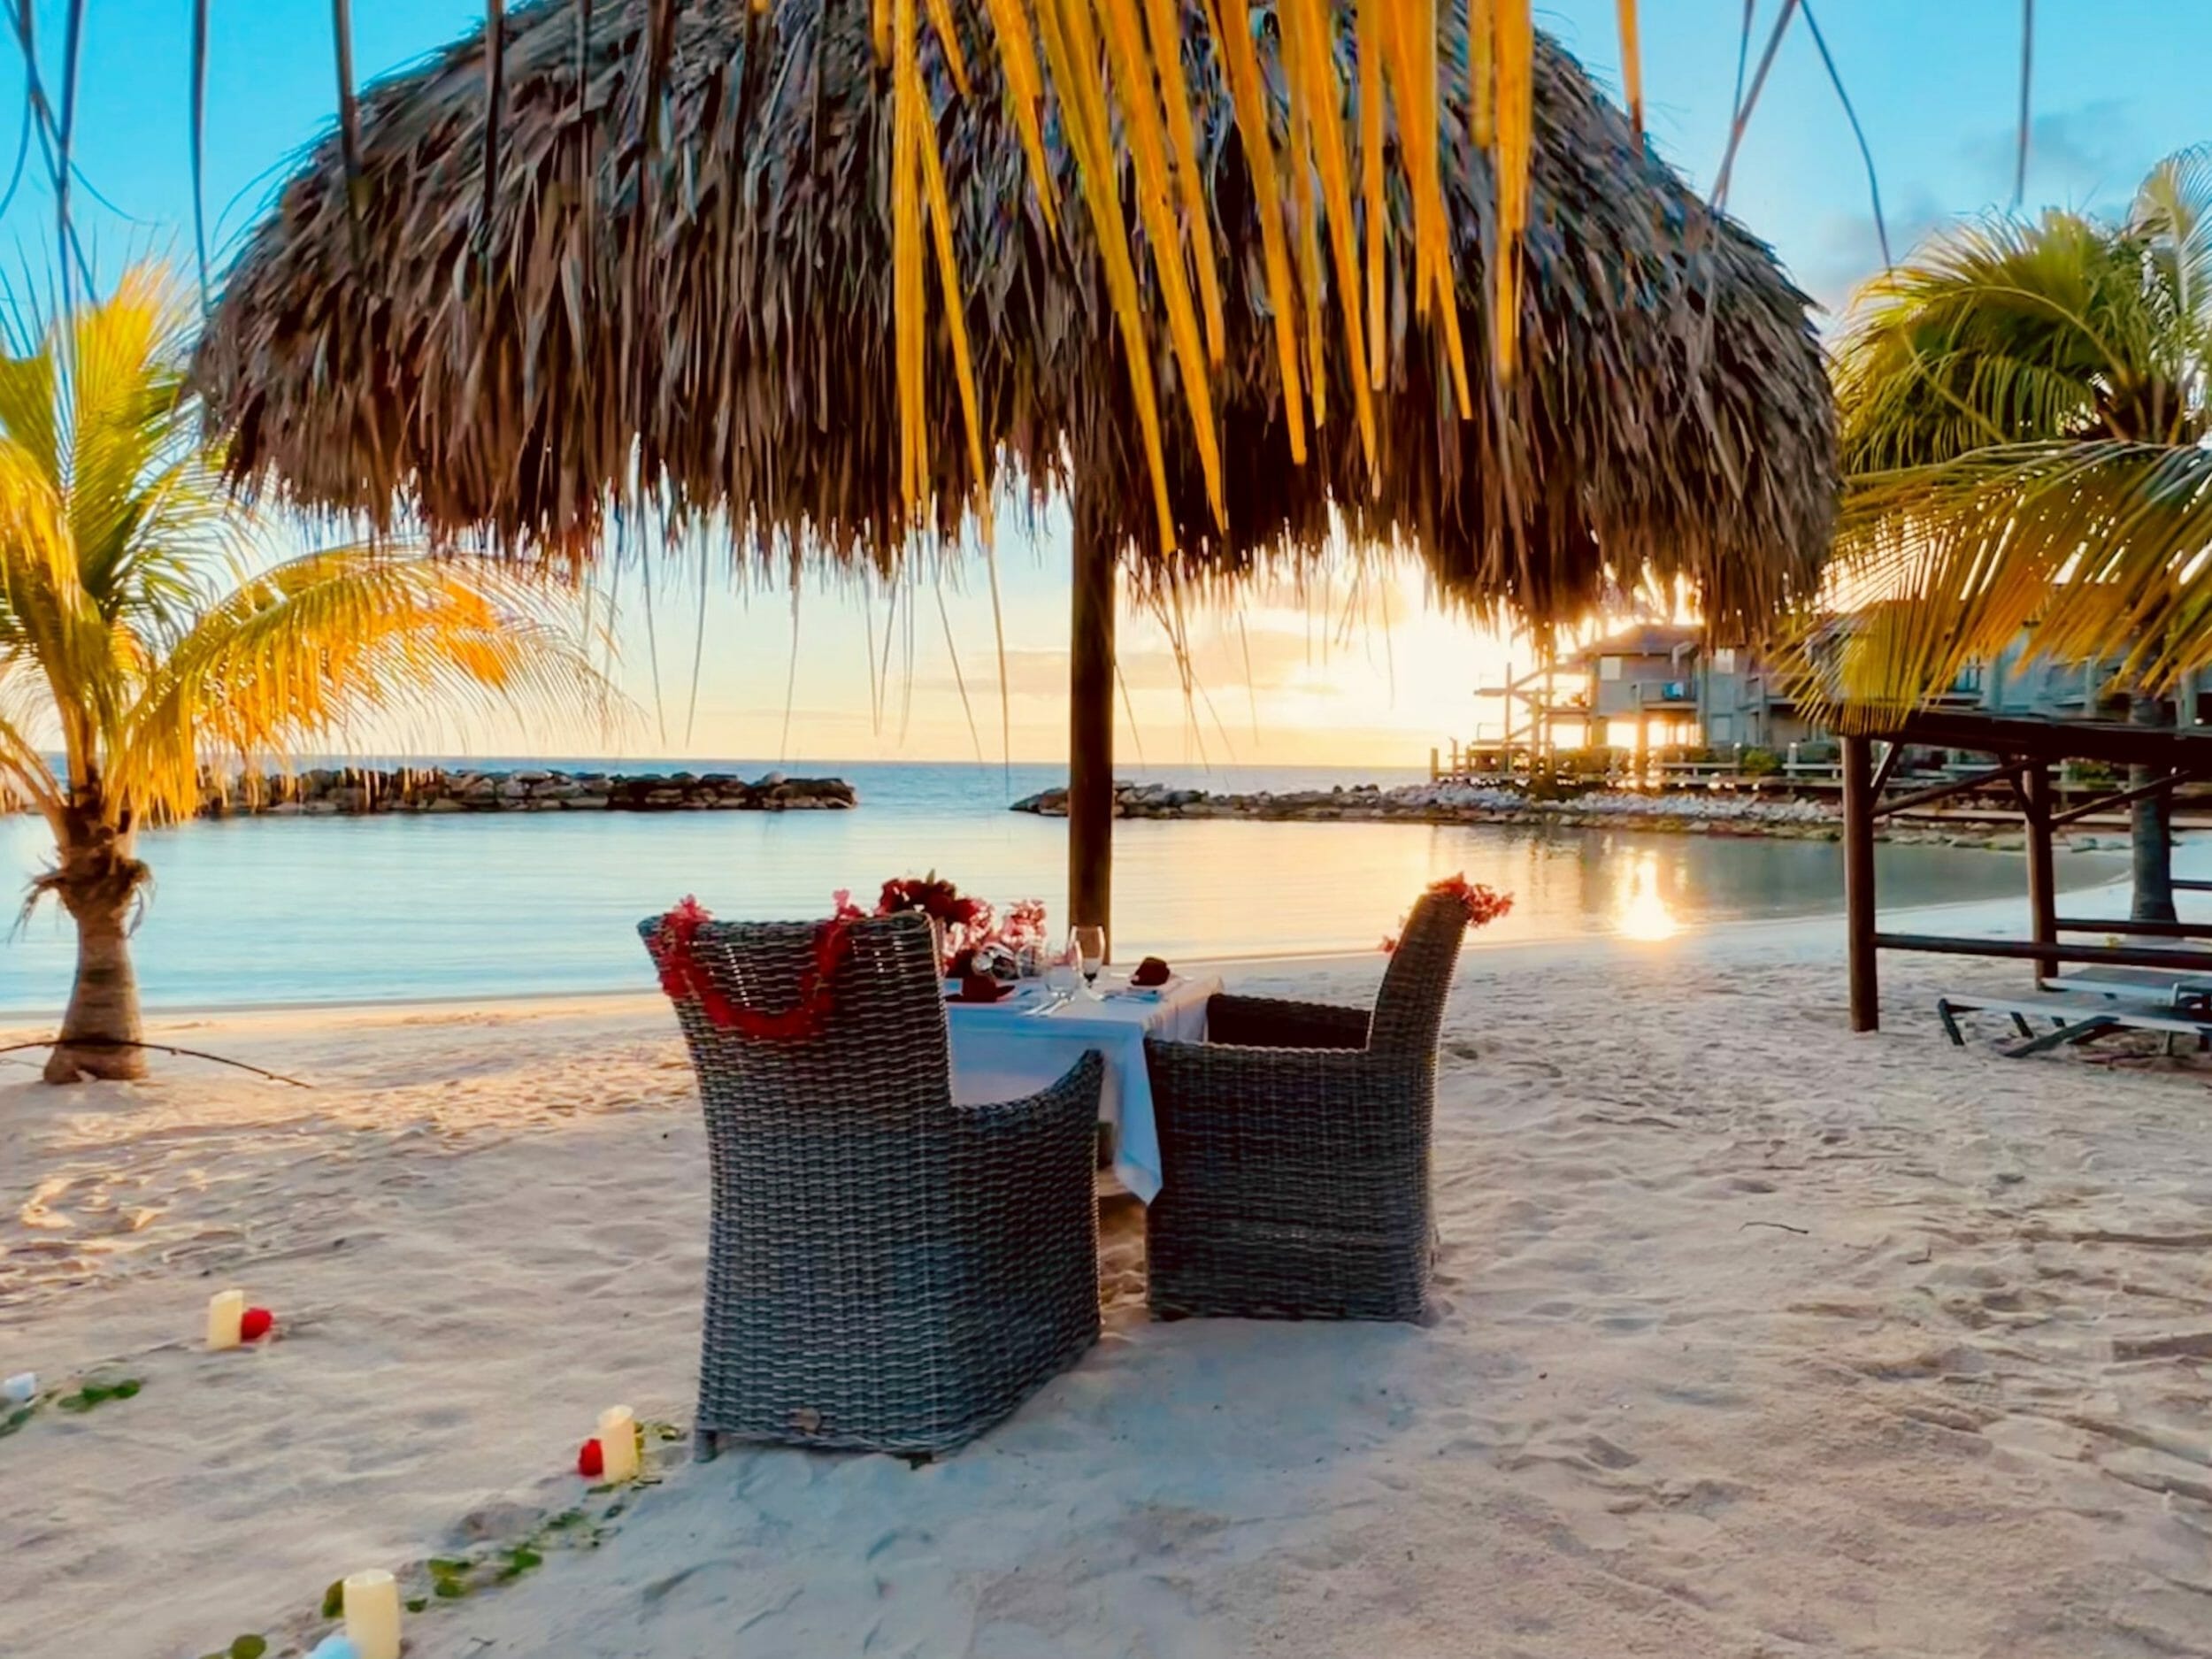 Experience dinner on the beach at our Curacao hotel